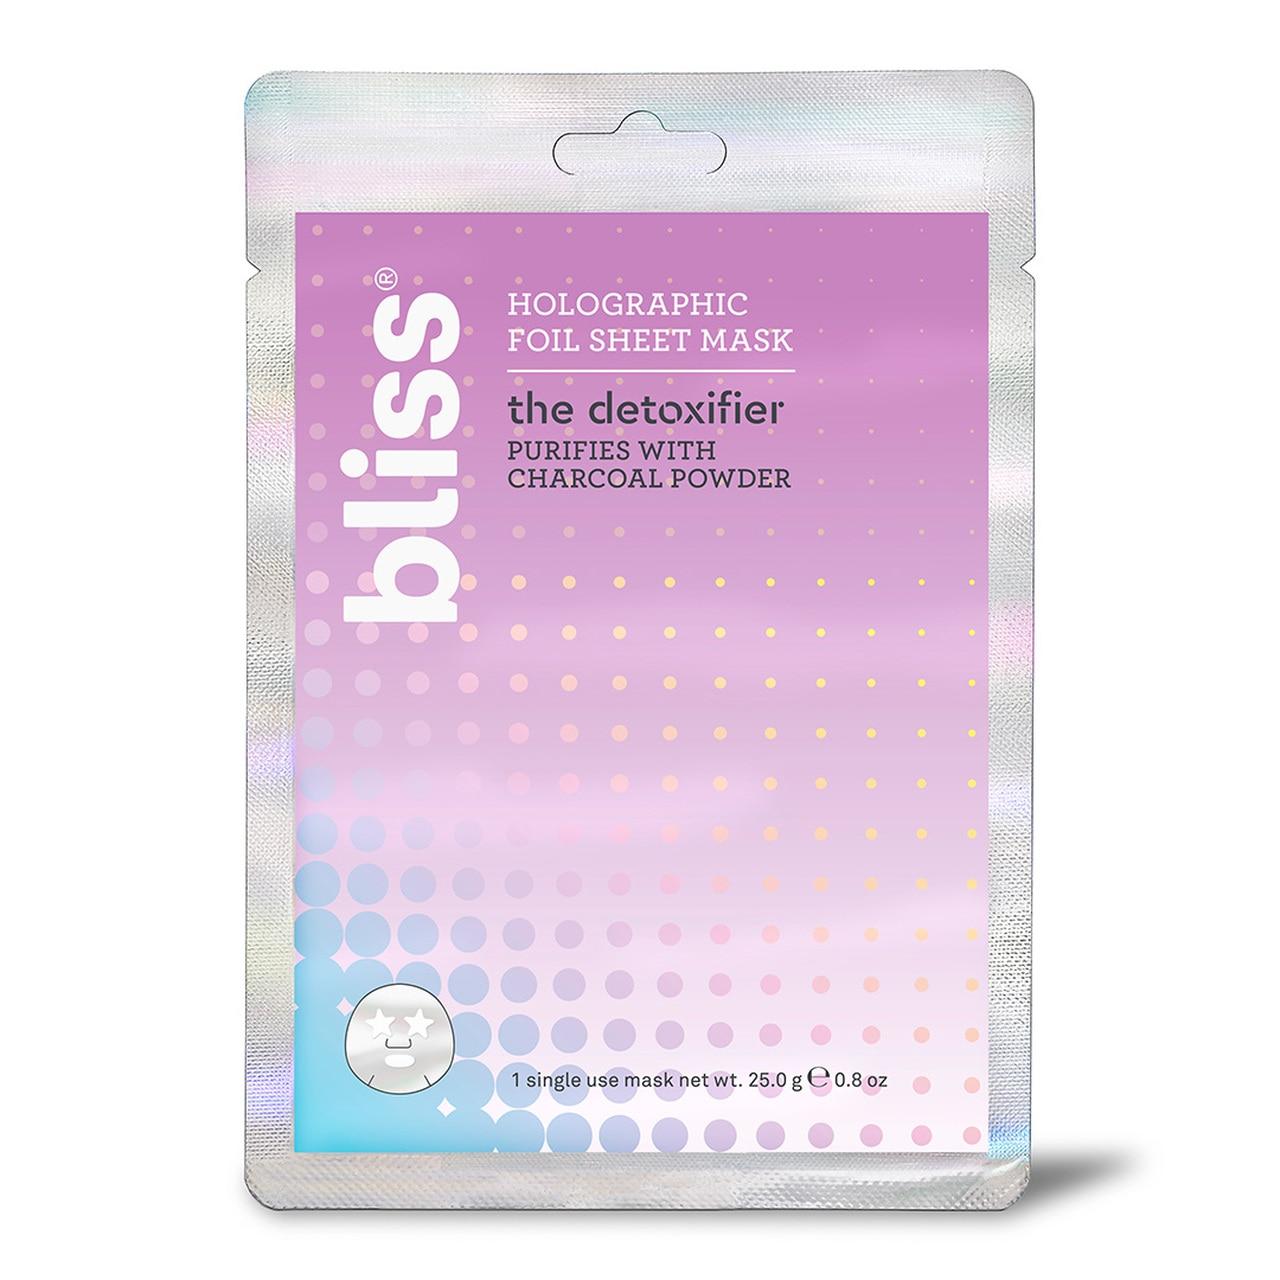 The Detoxifier Holographic Foil Sheet Mask with Charcoal Powder